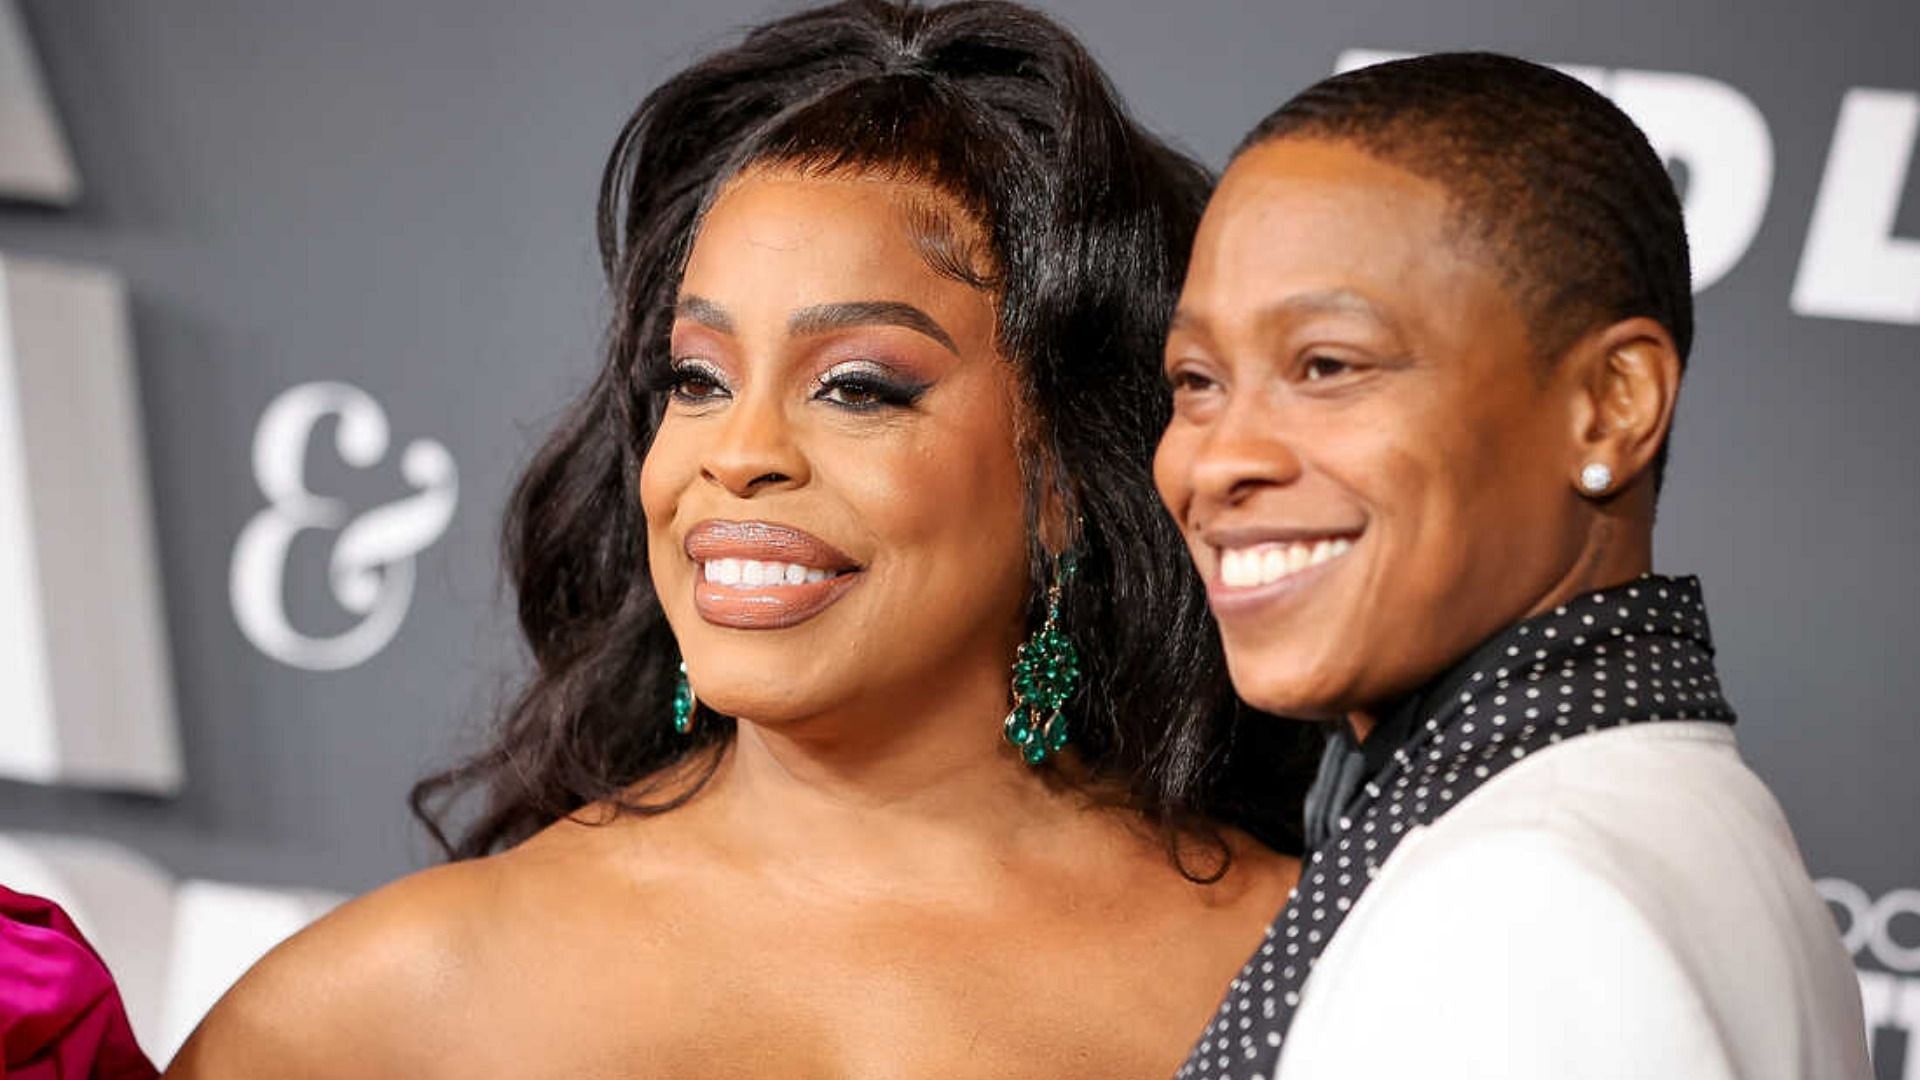 Niecy Nash and Jessica Betts (Image via Emma McIntyre/Getty Images)